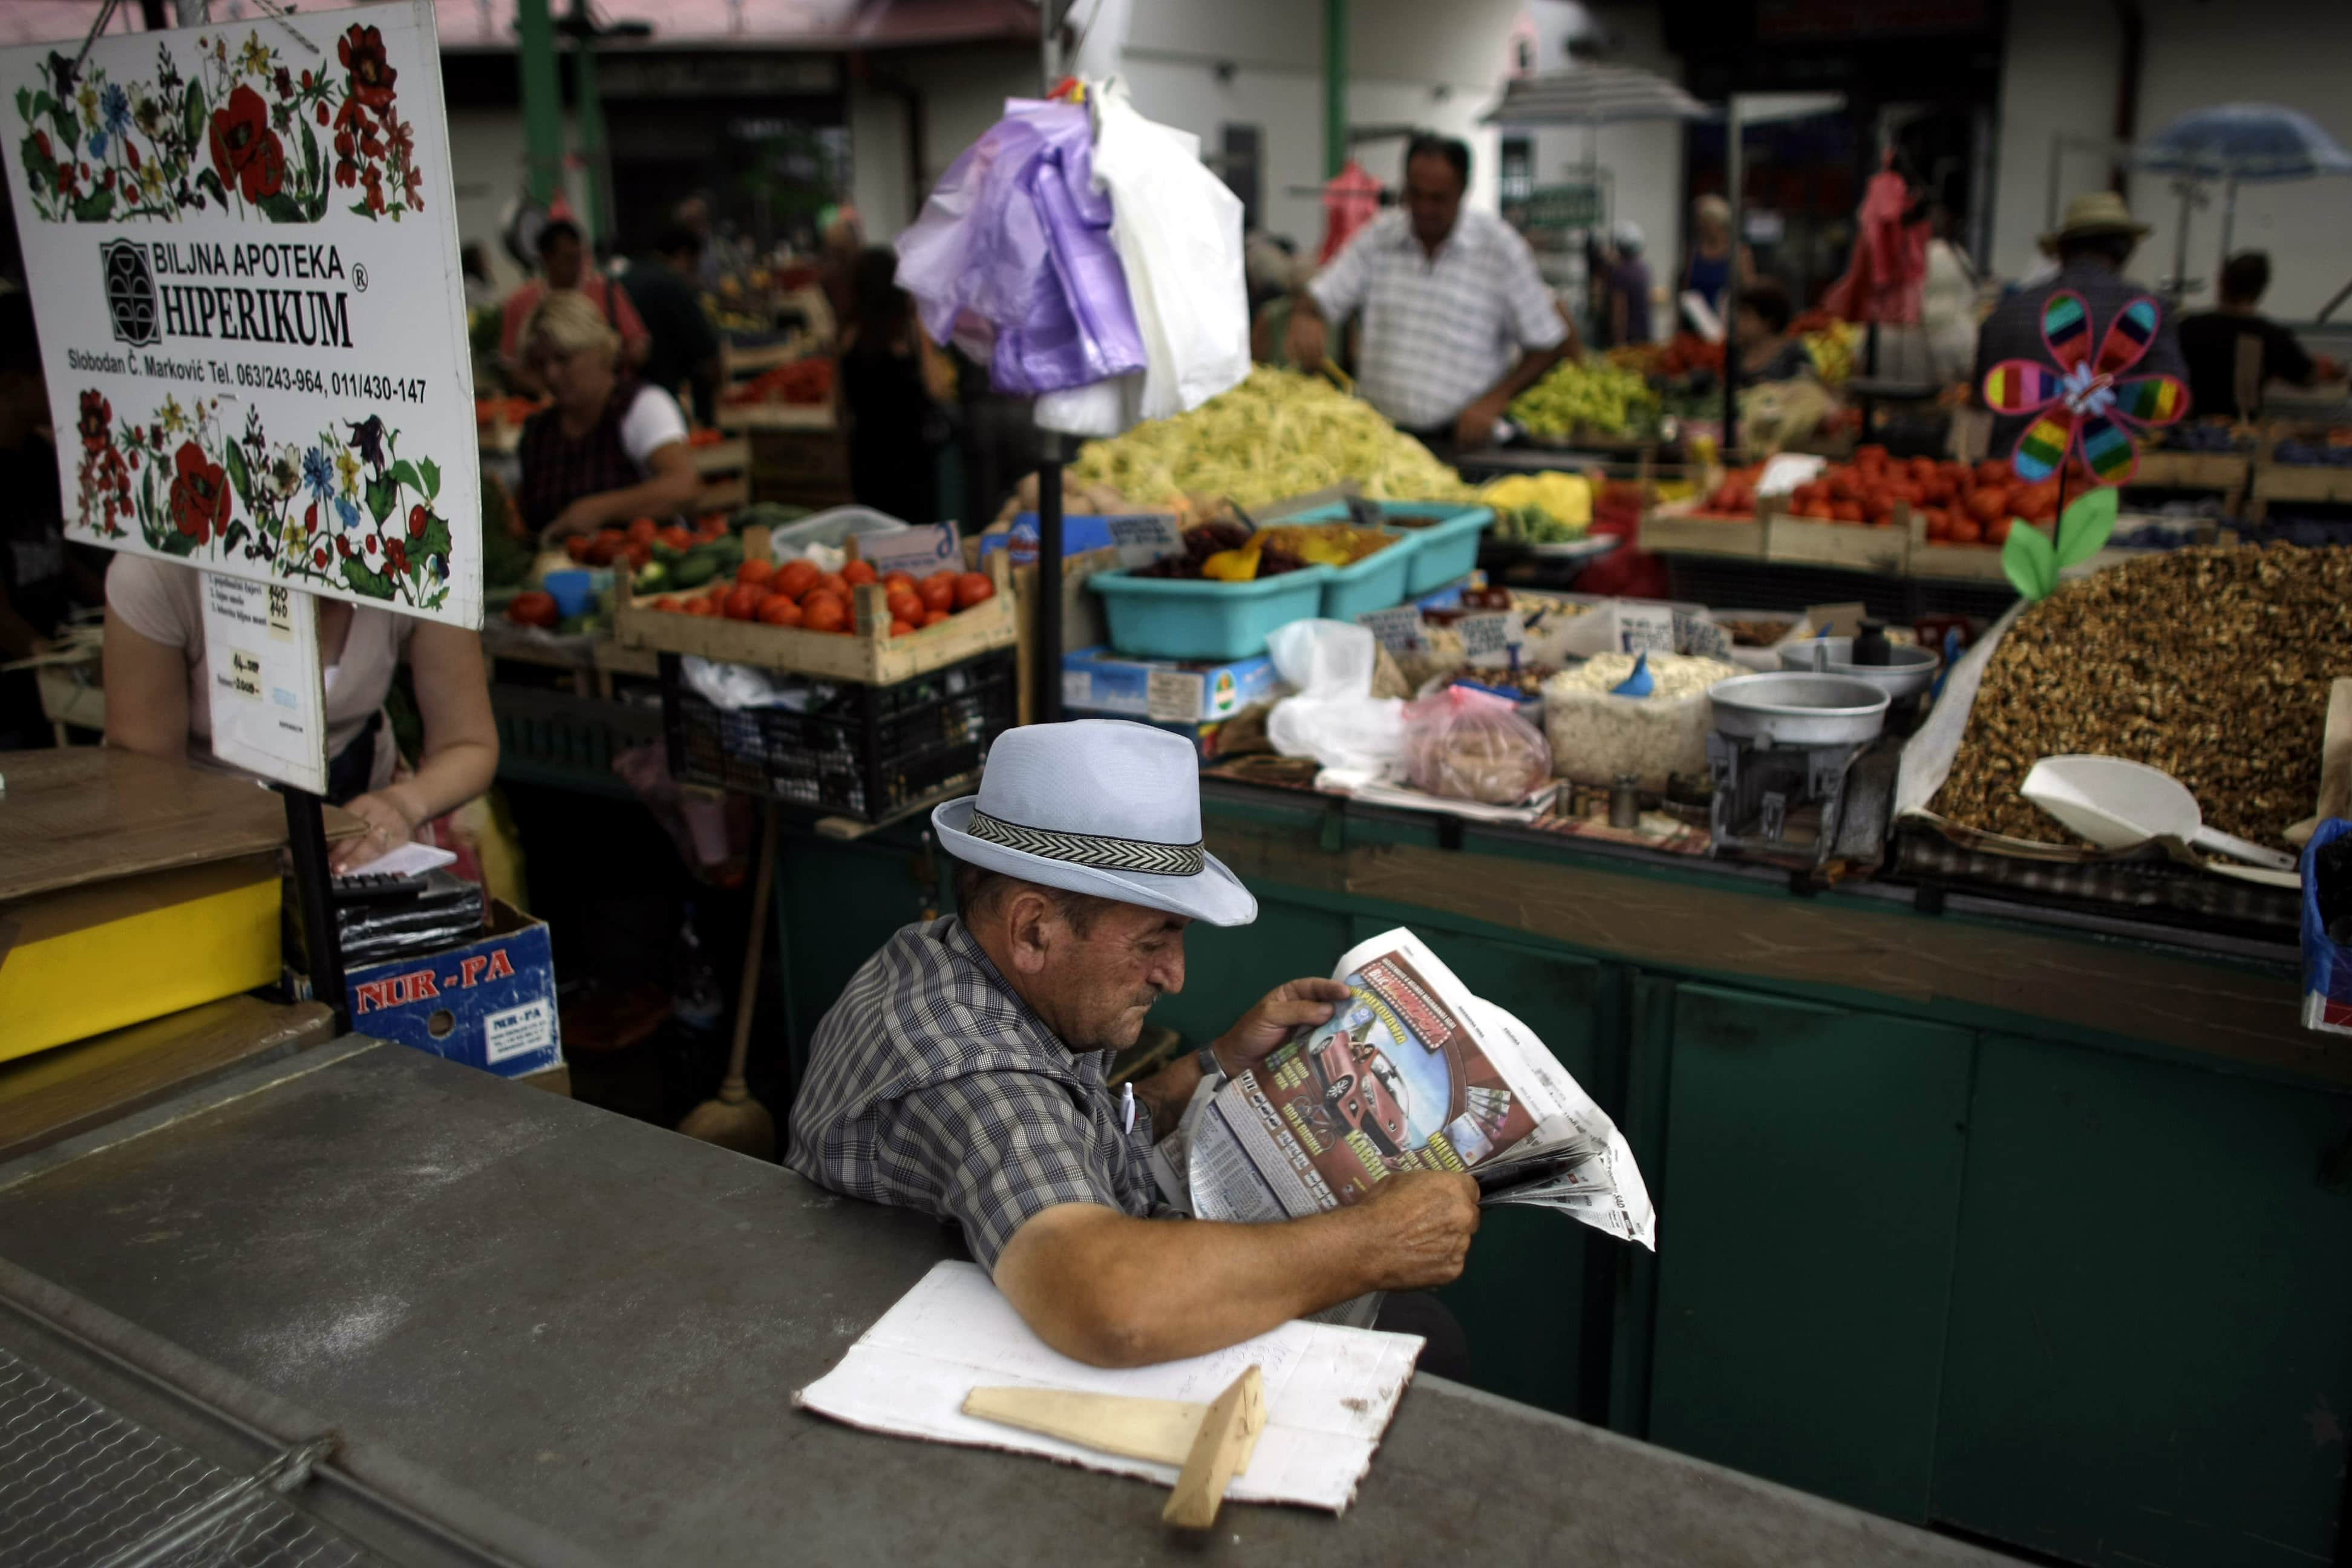 A vendor reads a newspaper while waiting for customers at an open air market in Belgrade, Serbia, 10 August 2010, AP Photo/Marko Drobnjakovic